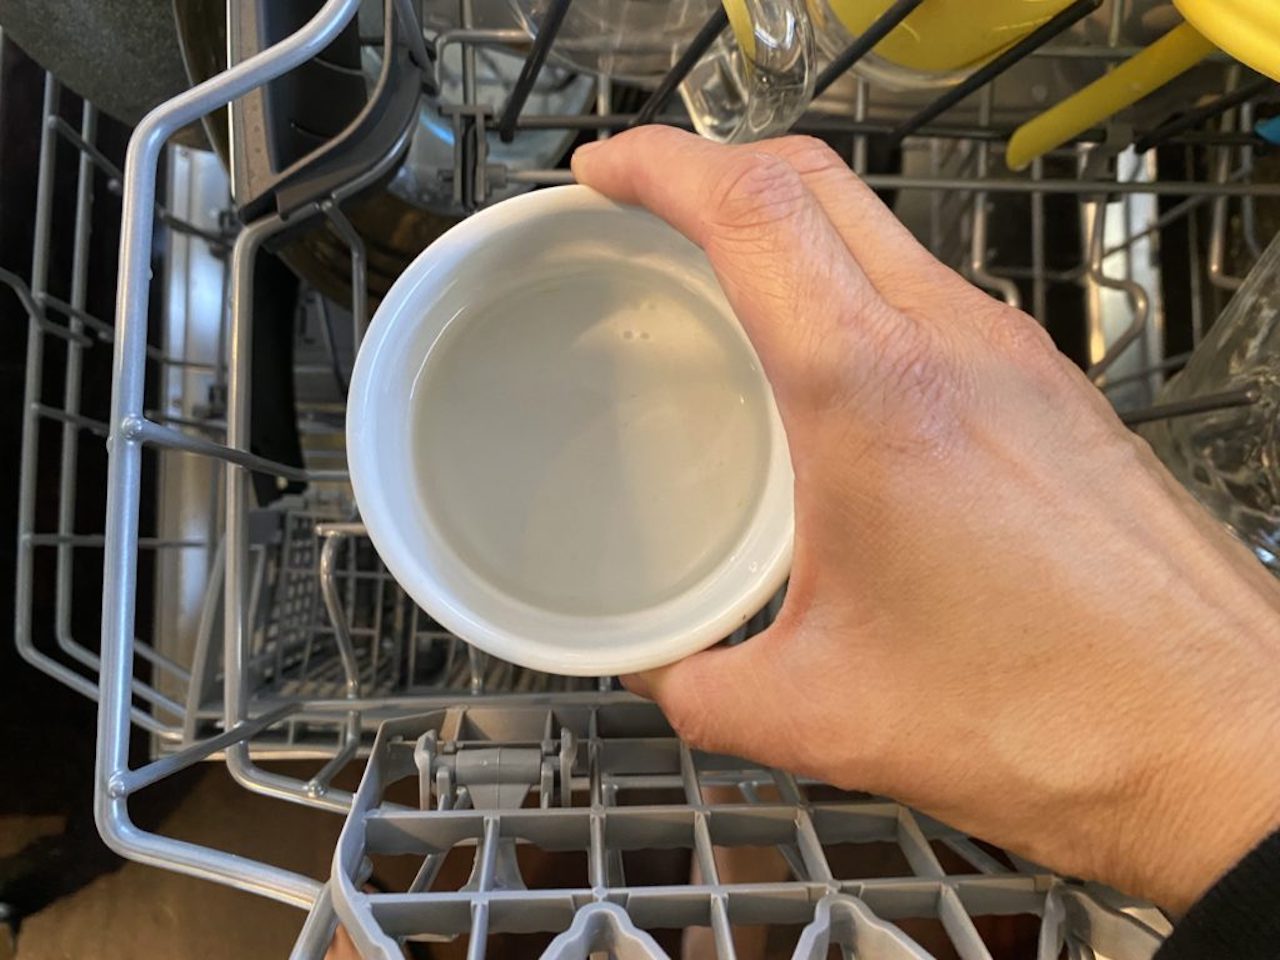 How To Clean A Dishwasher With Vinegar Safely